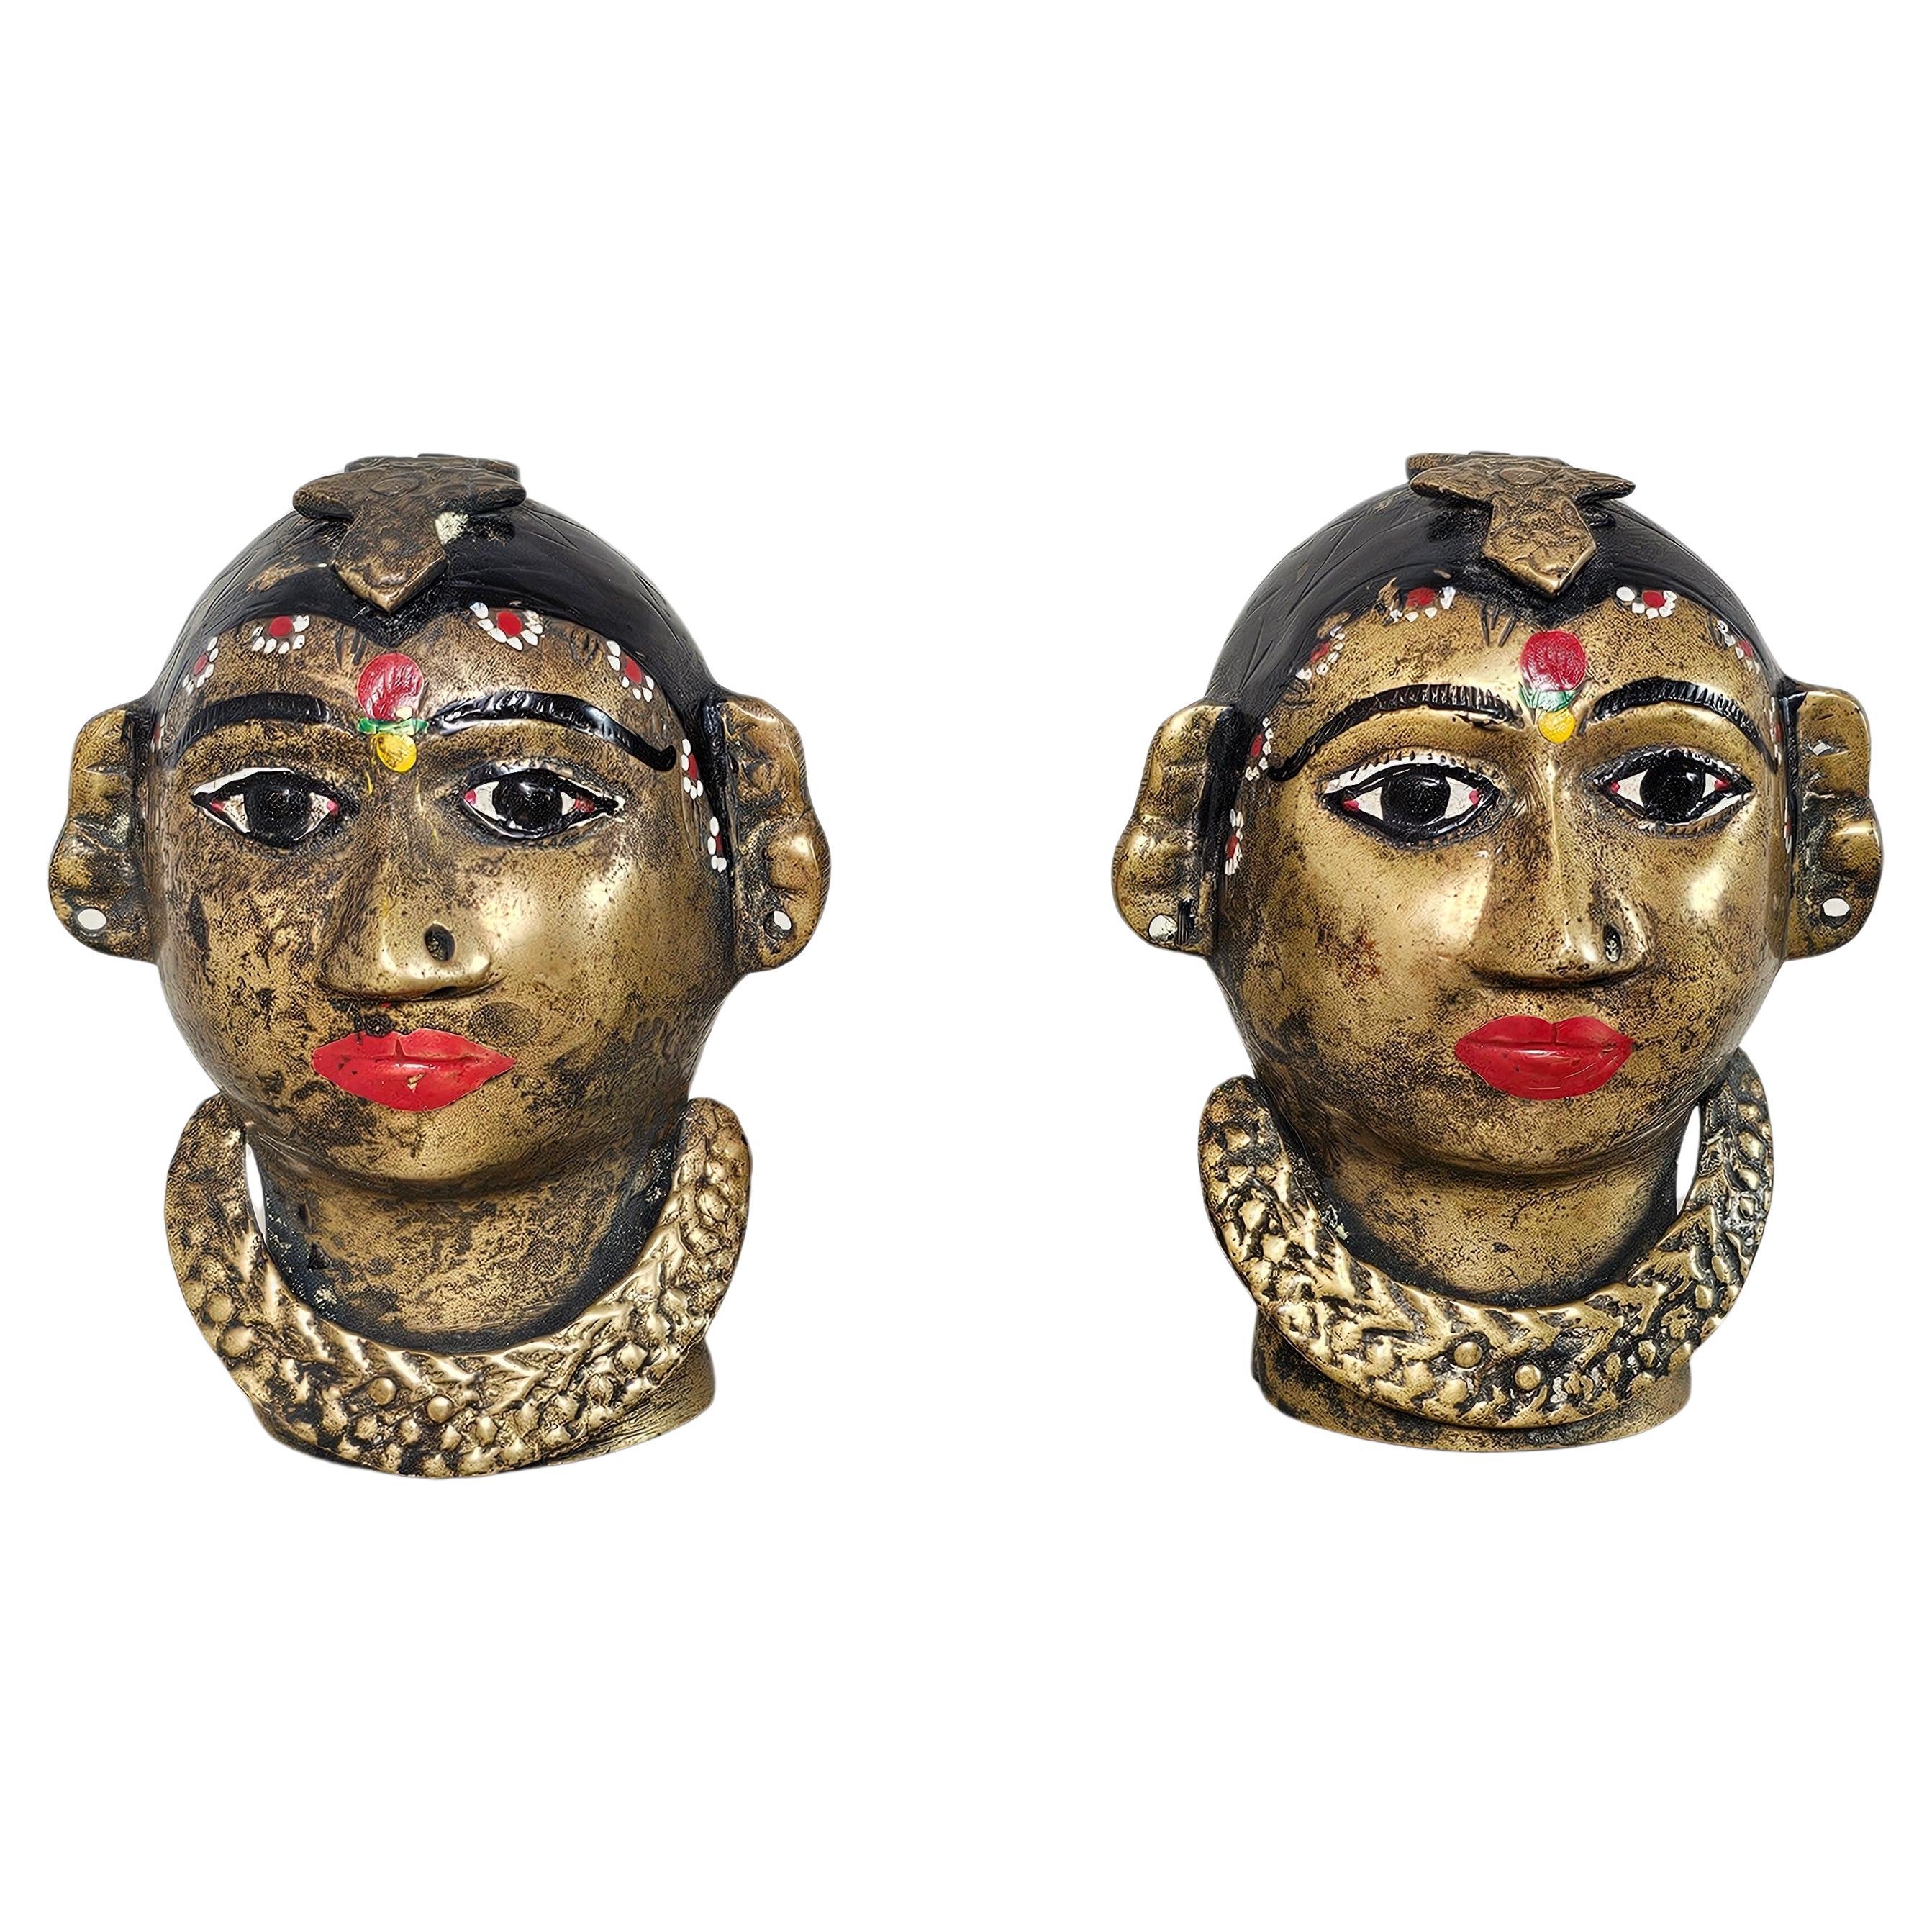 Antique Indian Hand Painted Brass Figural Gauri Head Sculpture Pair  For Sale